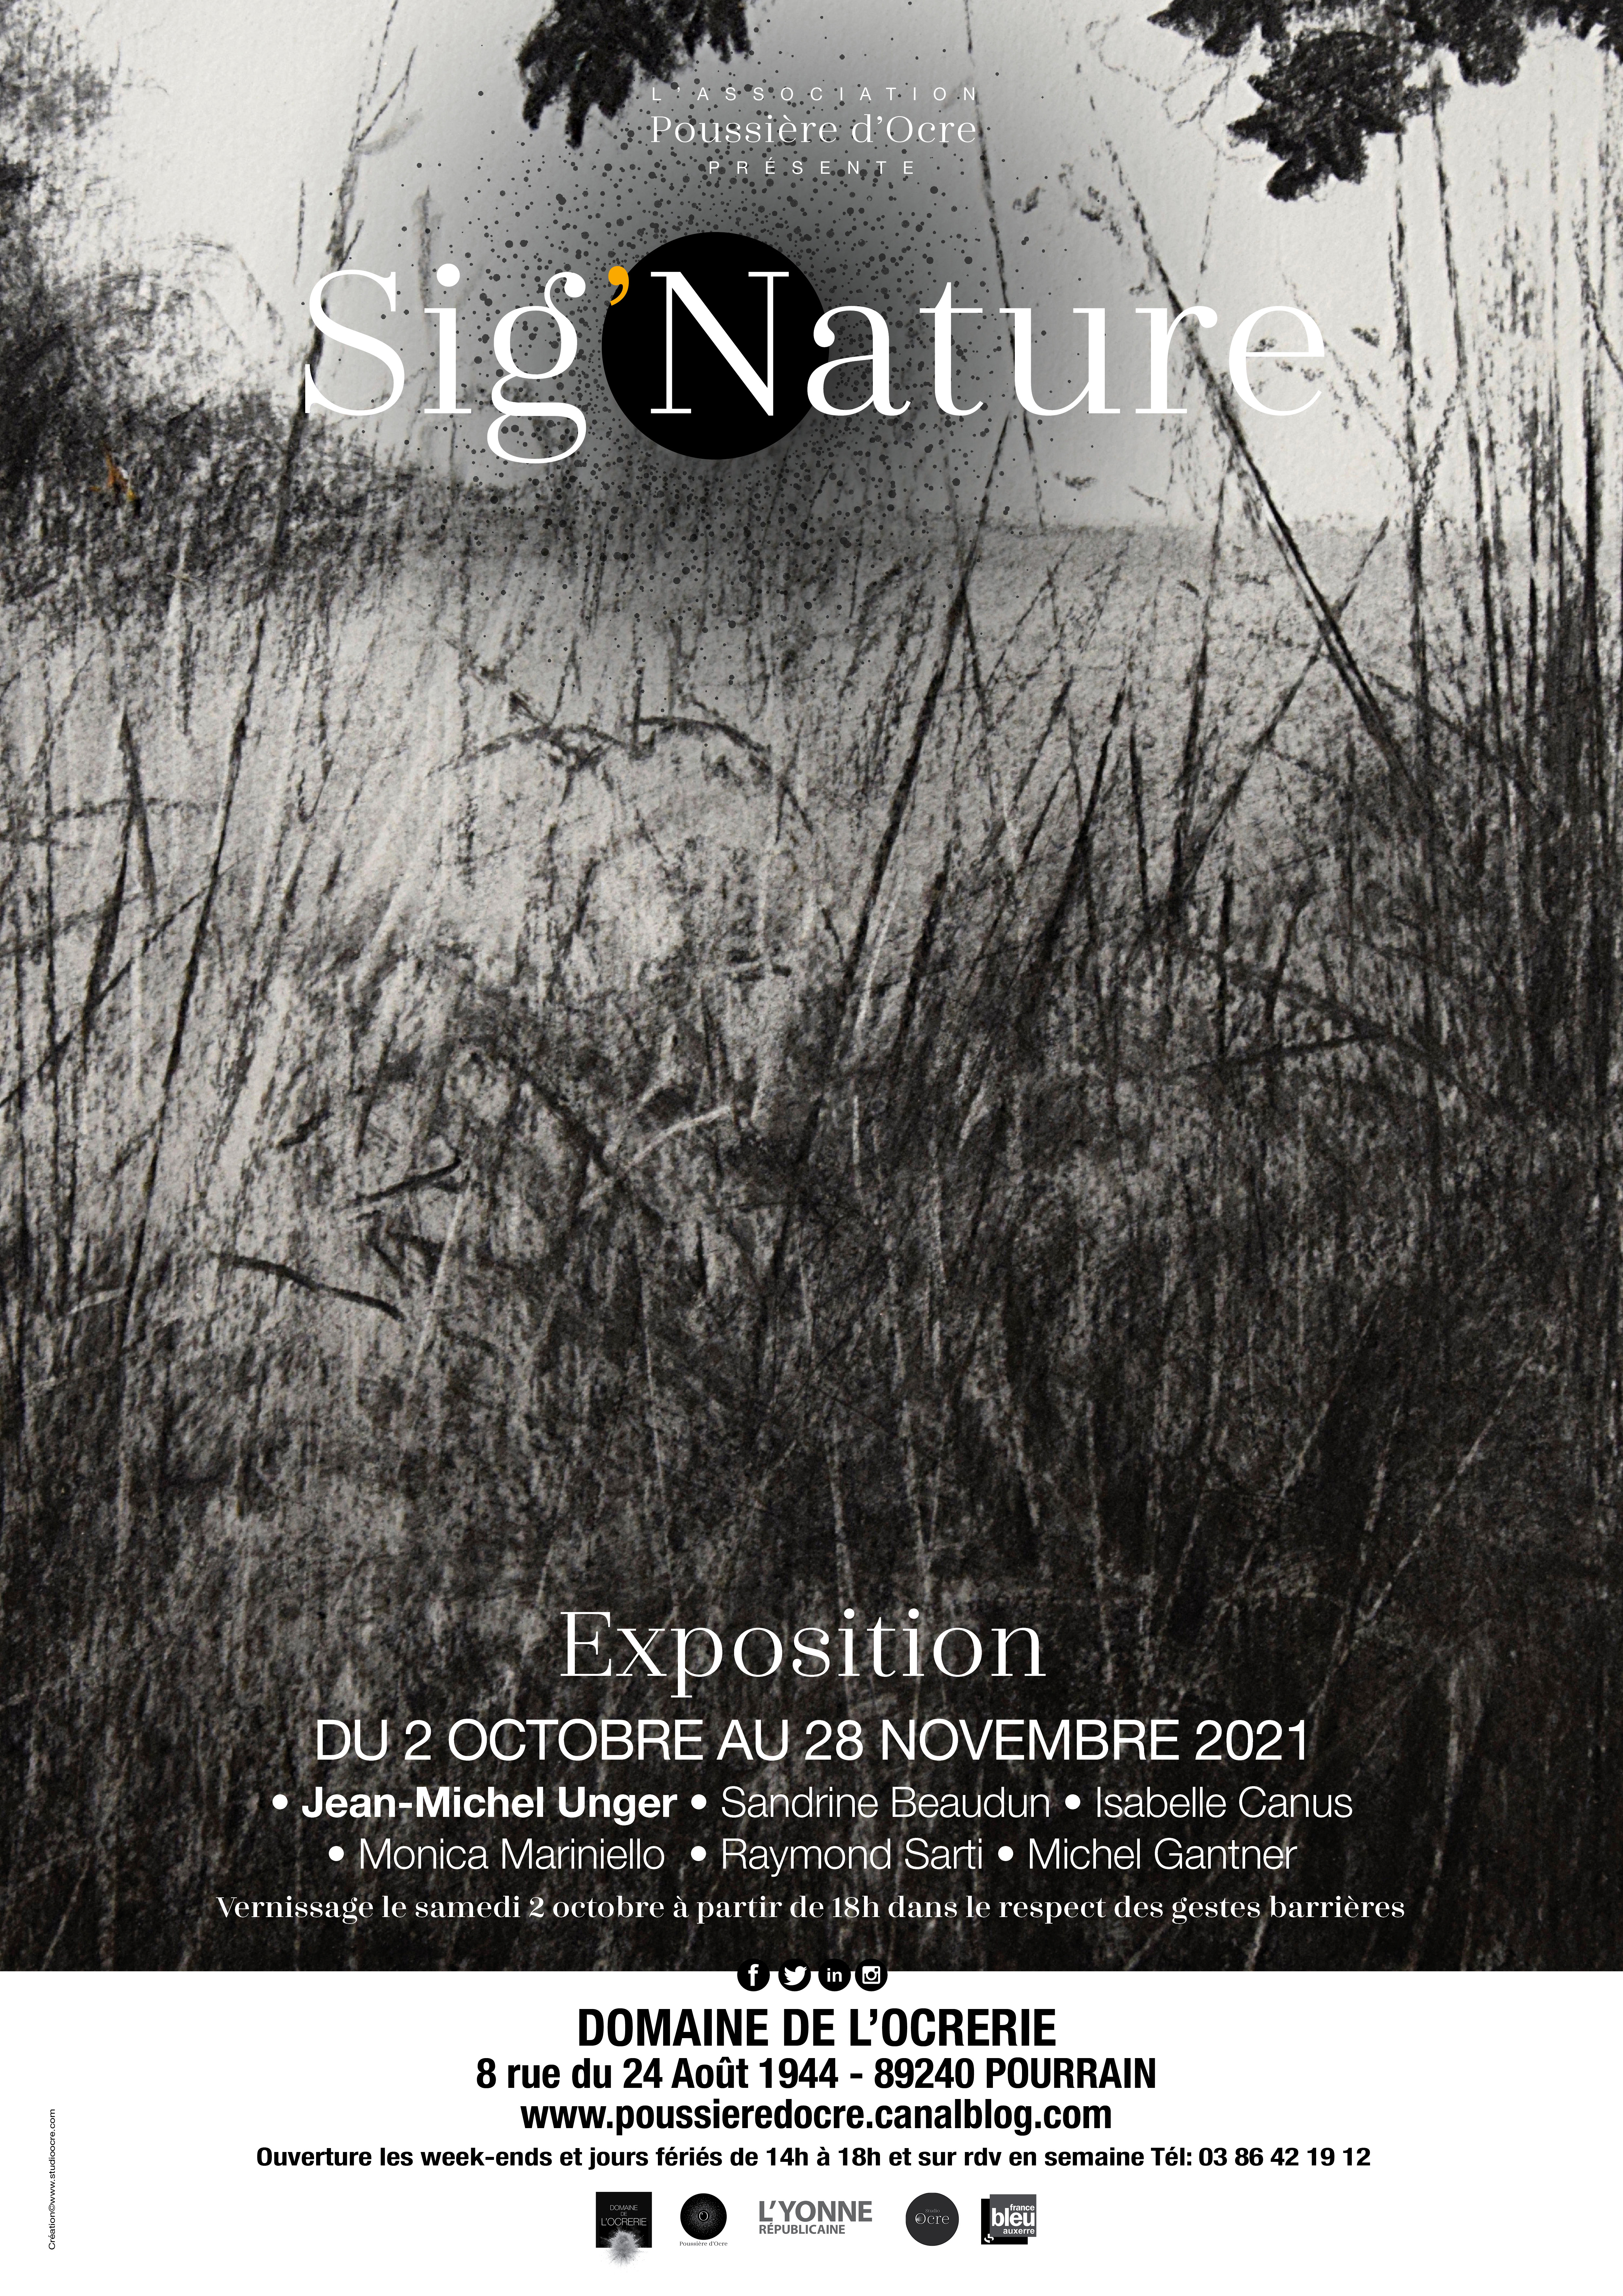 EXPOSITION SIG'NATURE